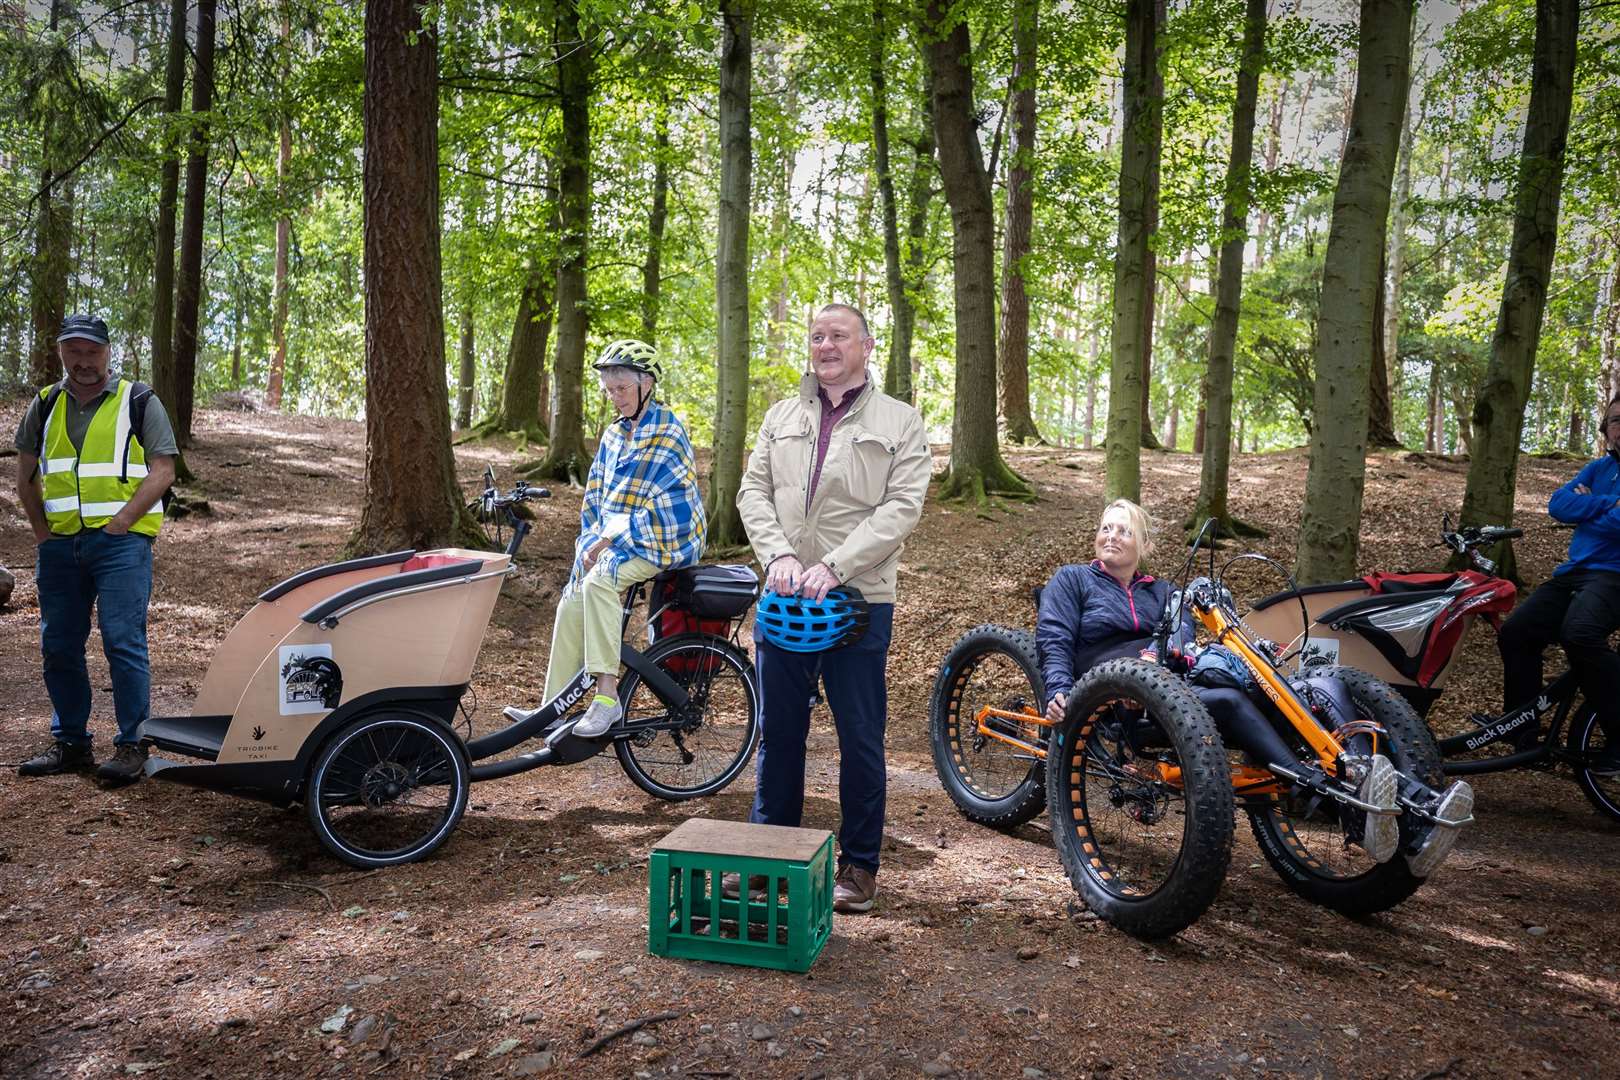 Culduthel Woods Group in Inverness, a local charity, hosted their first woodland gathering as part of the Highland Climate Festival, to mark its ownership success.